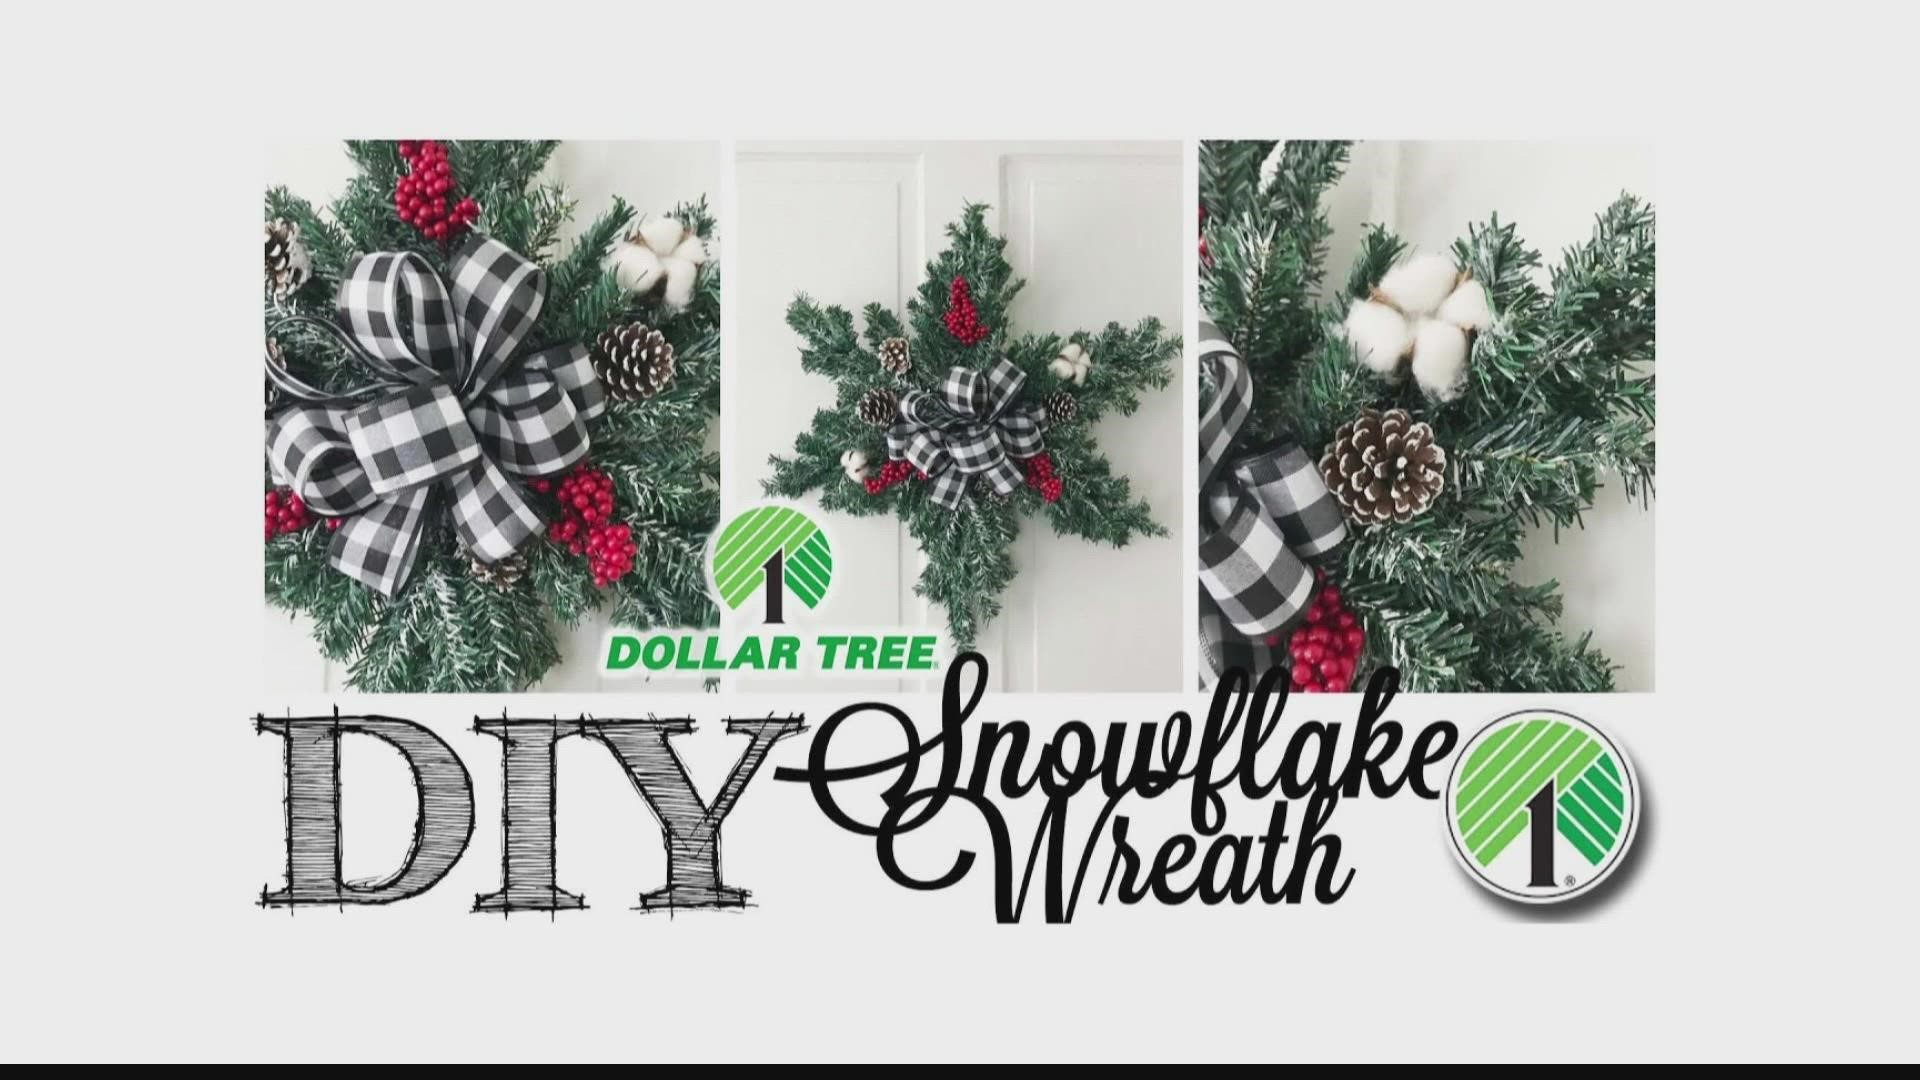 Shannon Hale’s most popular content is the Dollar Tree DIYs.